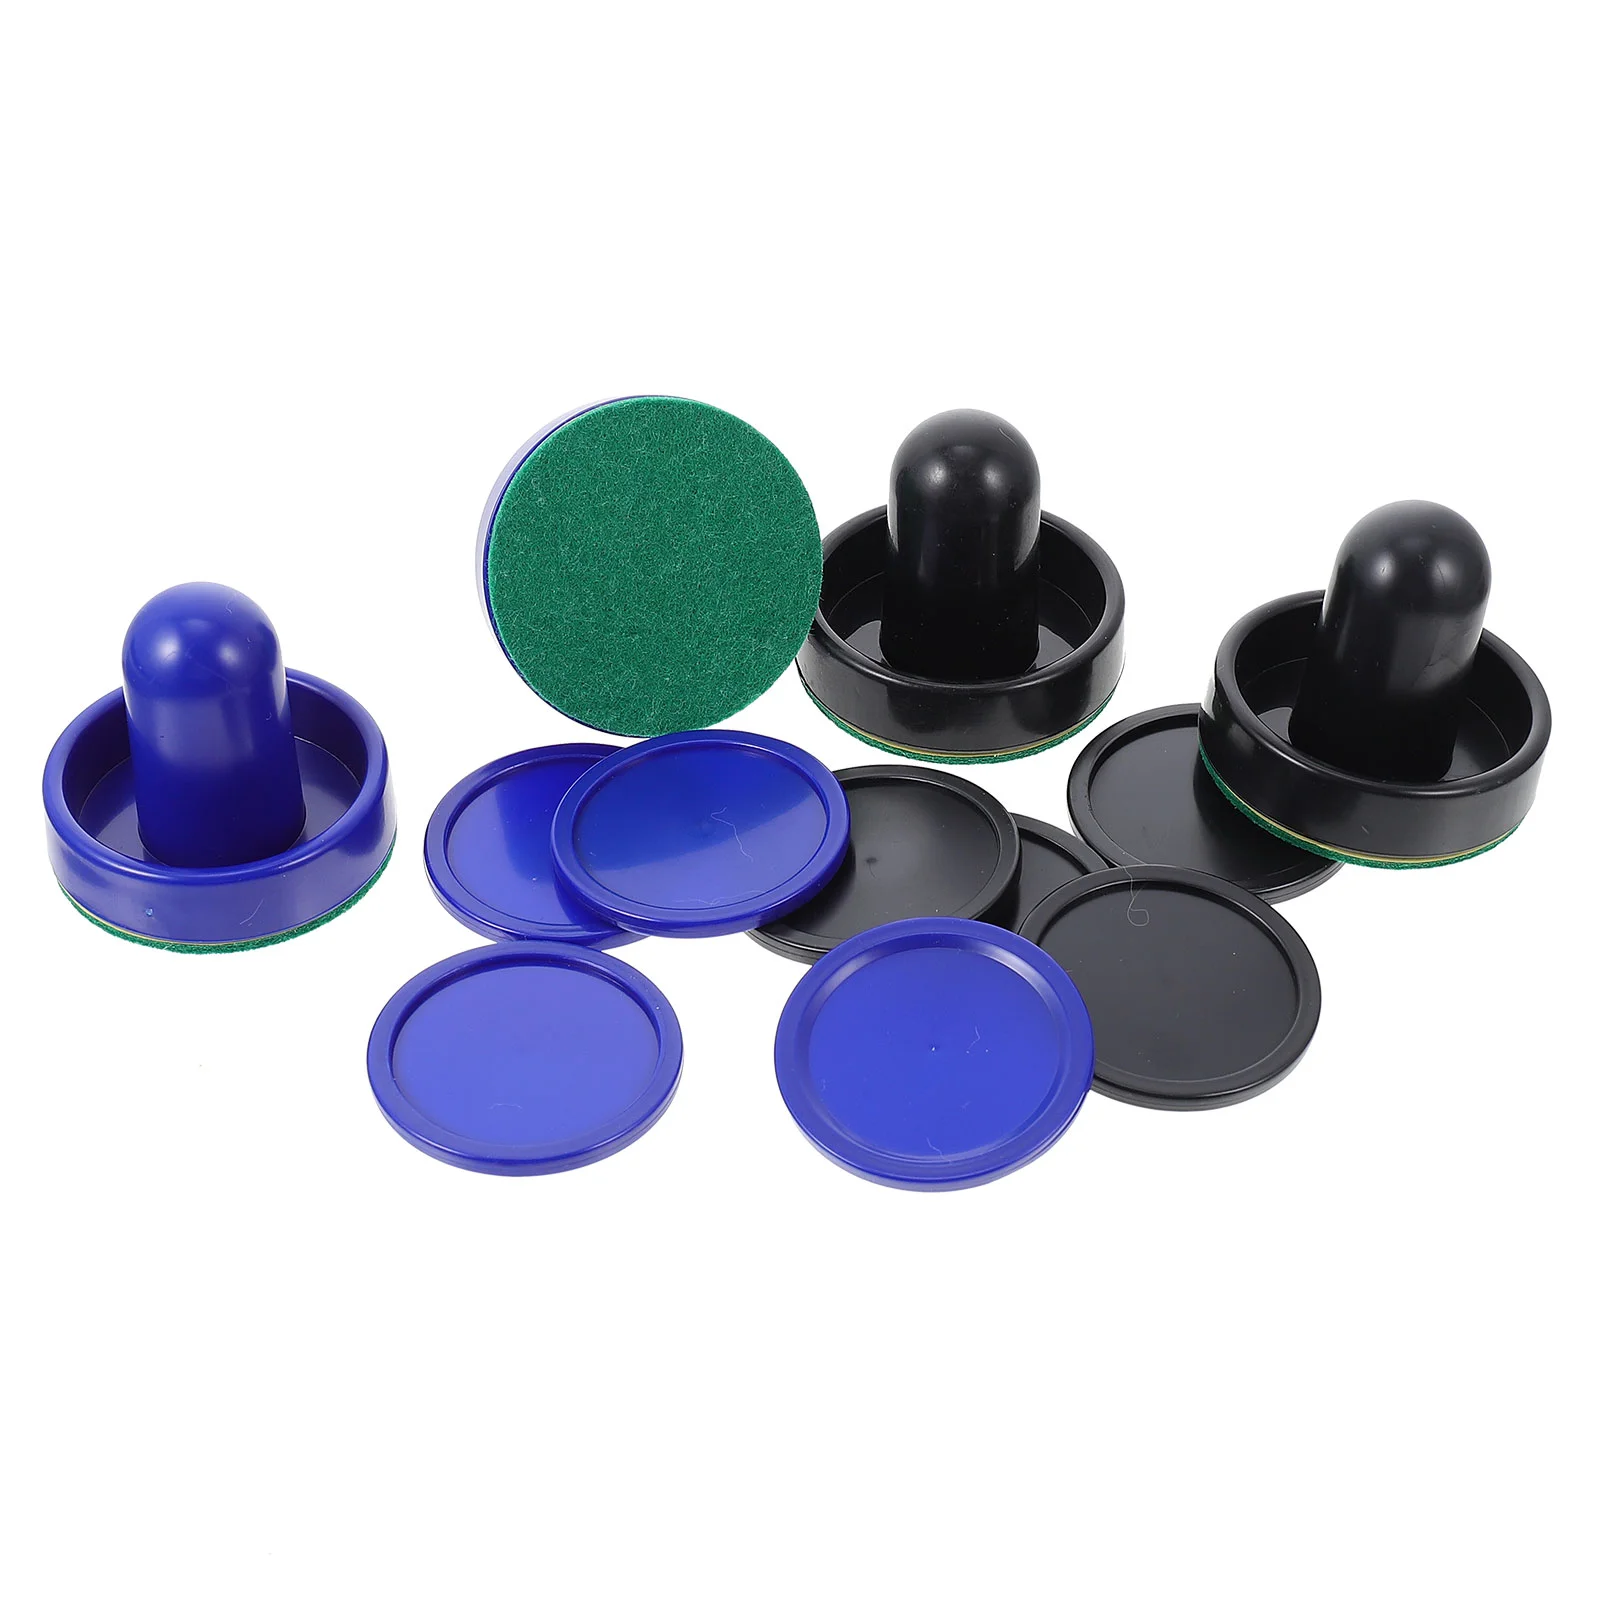 

Air Hockey Felt Pushers Strikers Goalies Plus Pucks Air Hockey Replacement Accessories Adult Table Games Entertaining Toy